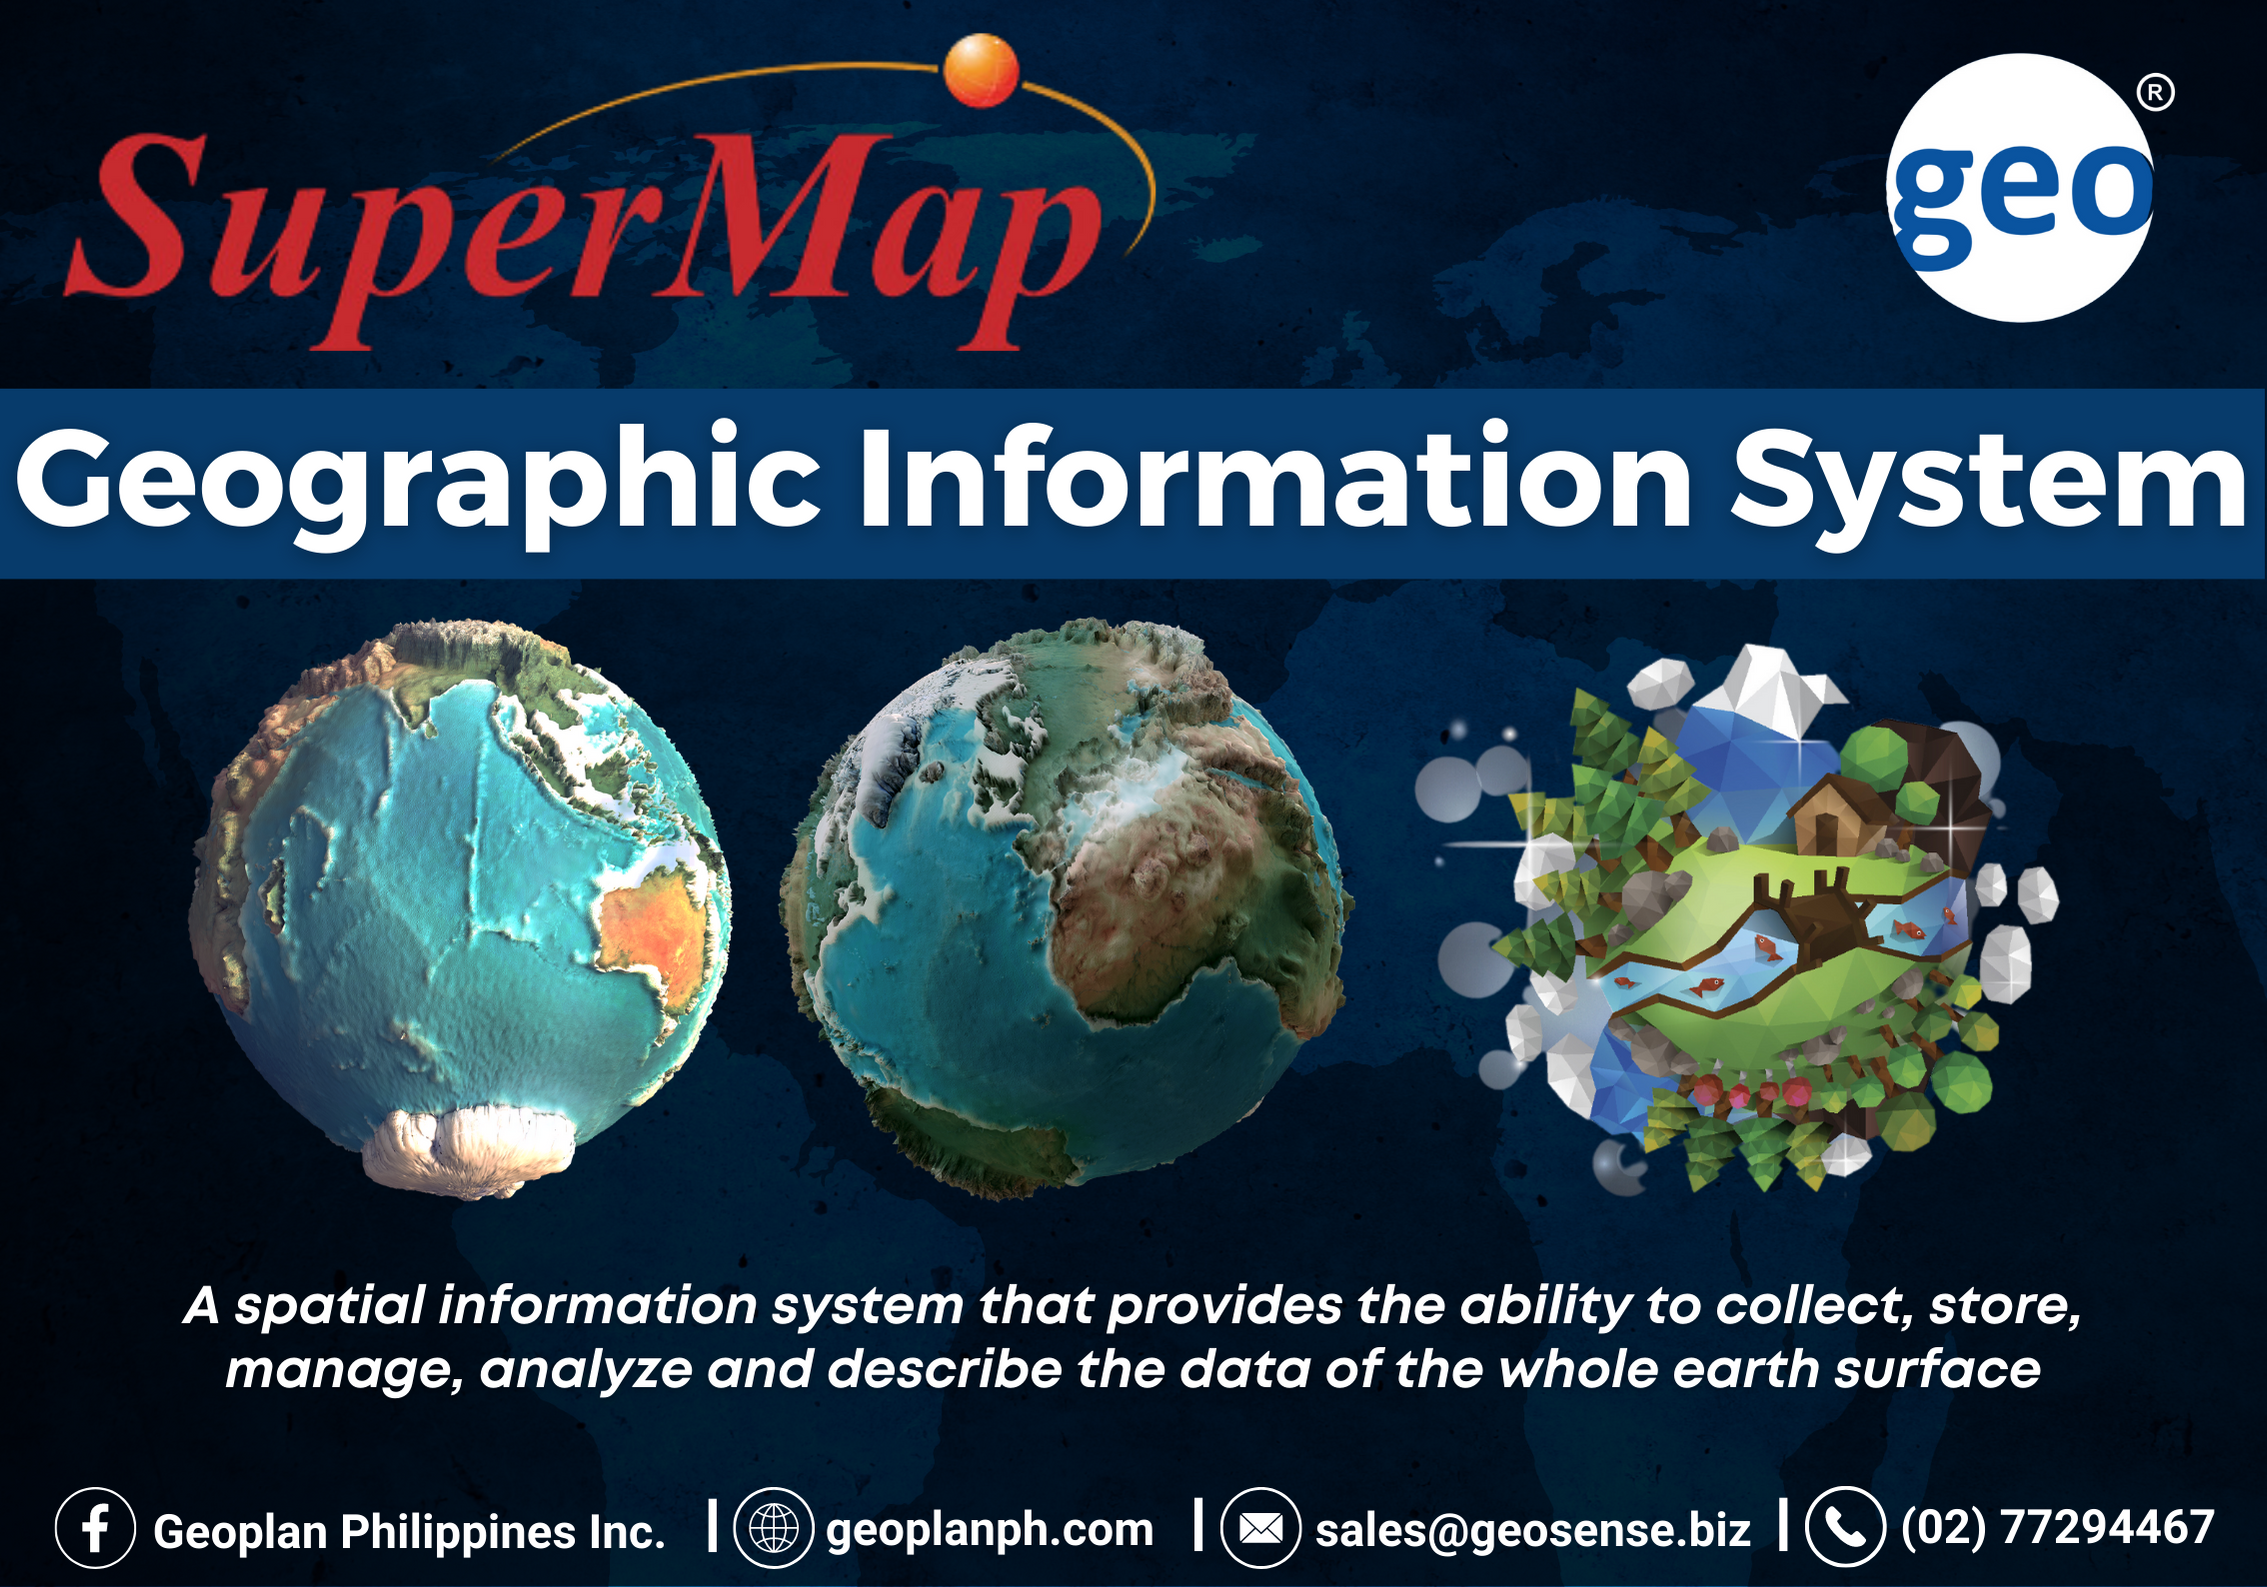 SuperMap: The GIS that Offers The Best Results